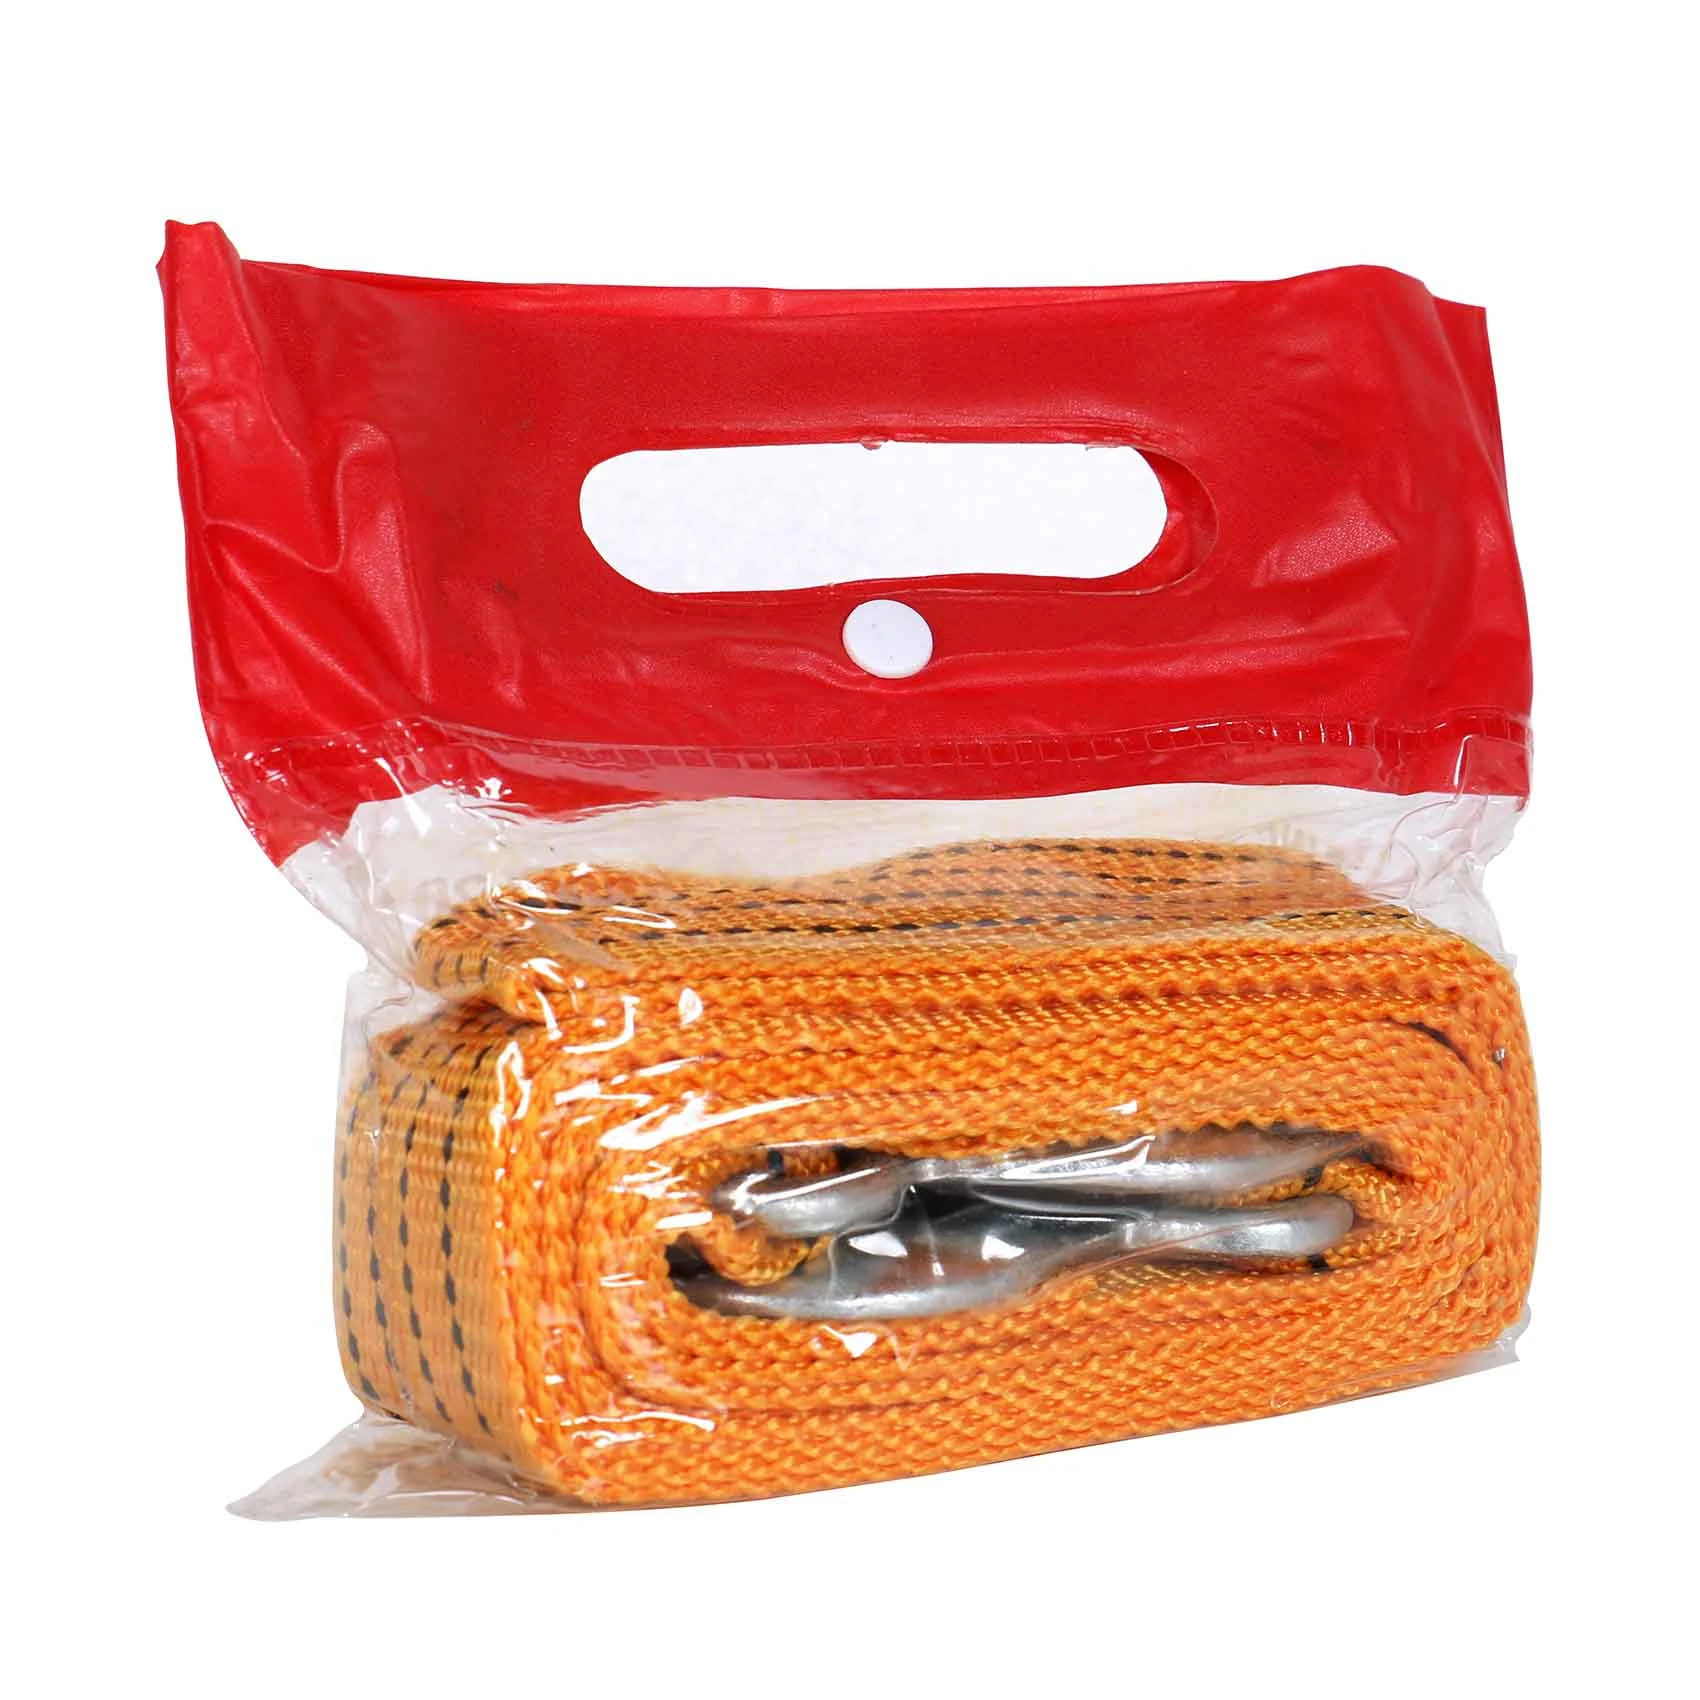 Tow Rope with Hook, 9m, Yallow,1790000001051 price in UAE,  UAE